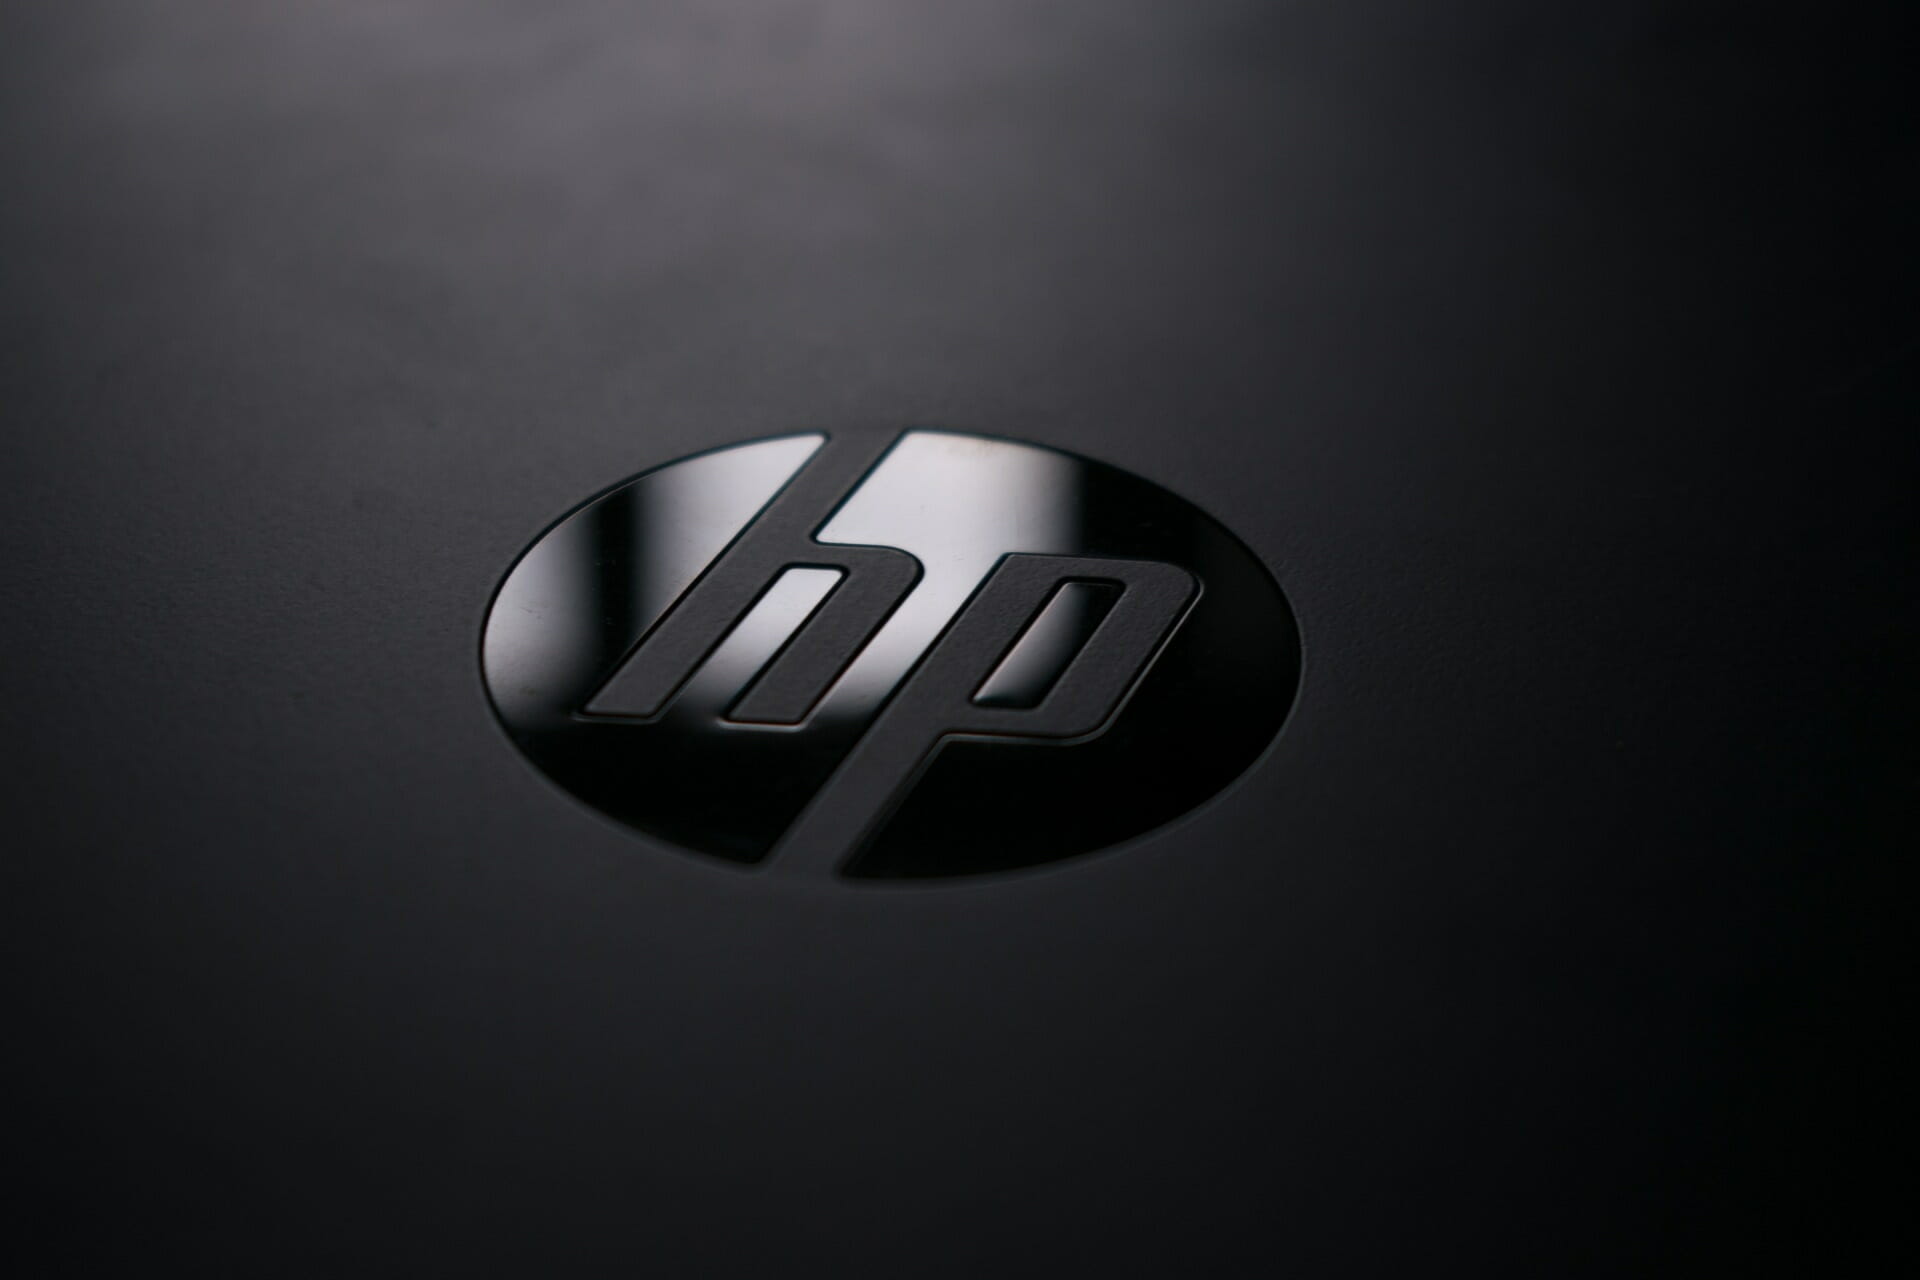 HP deals with Adobe CC